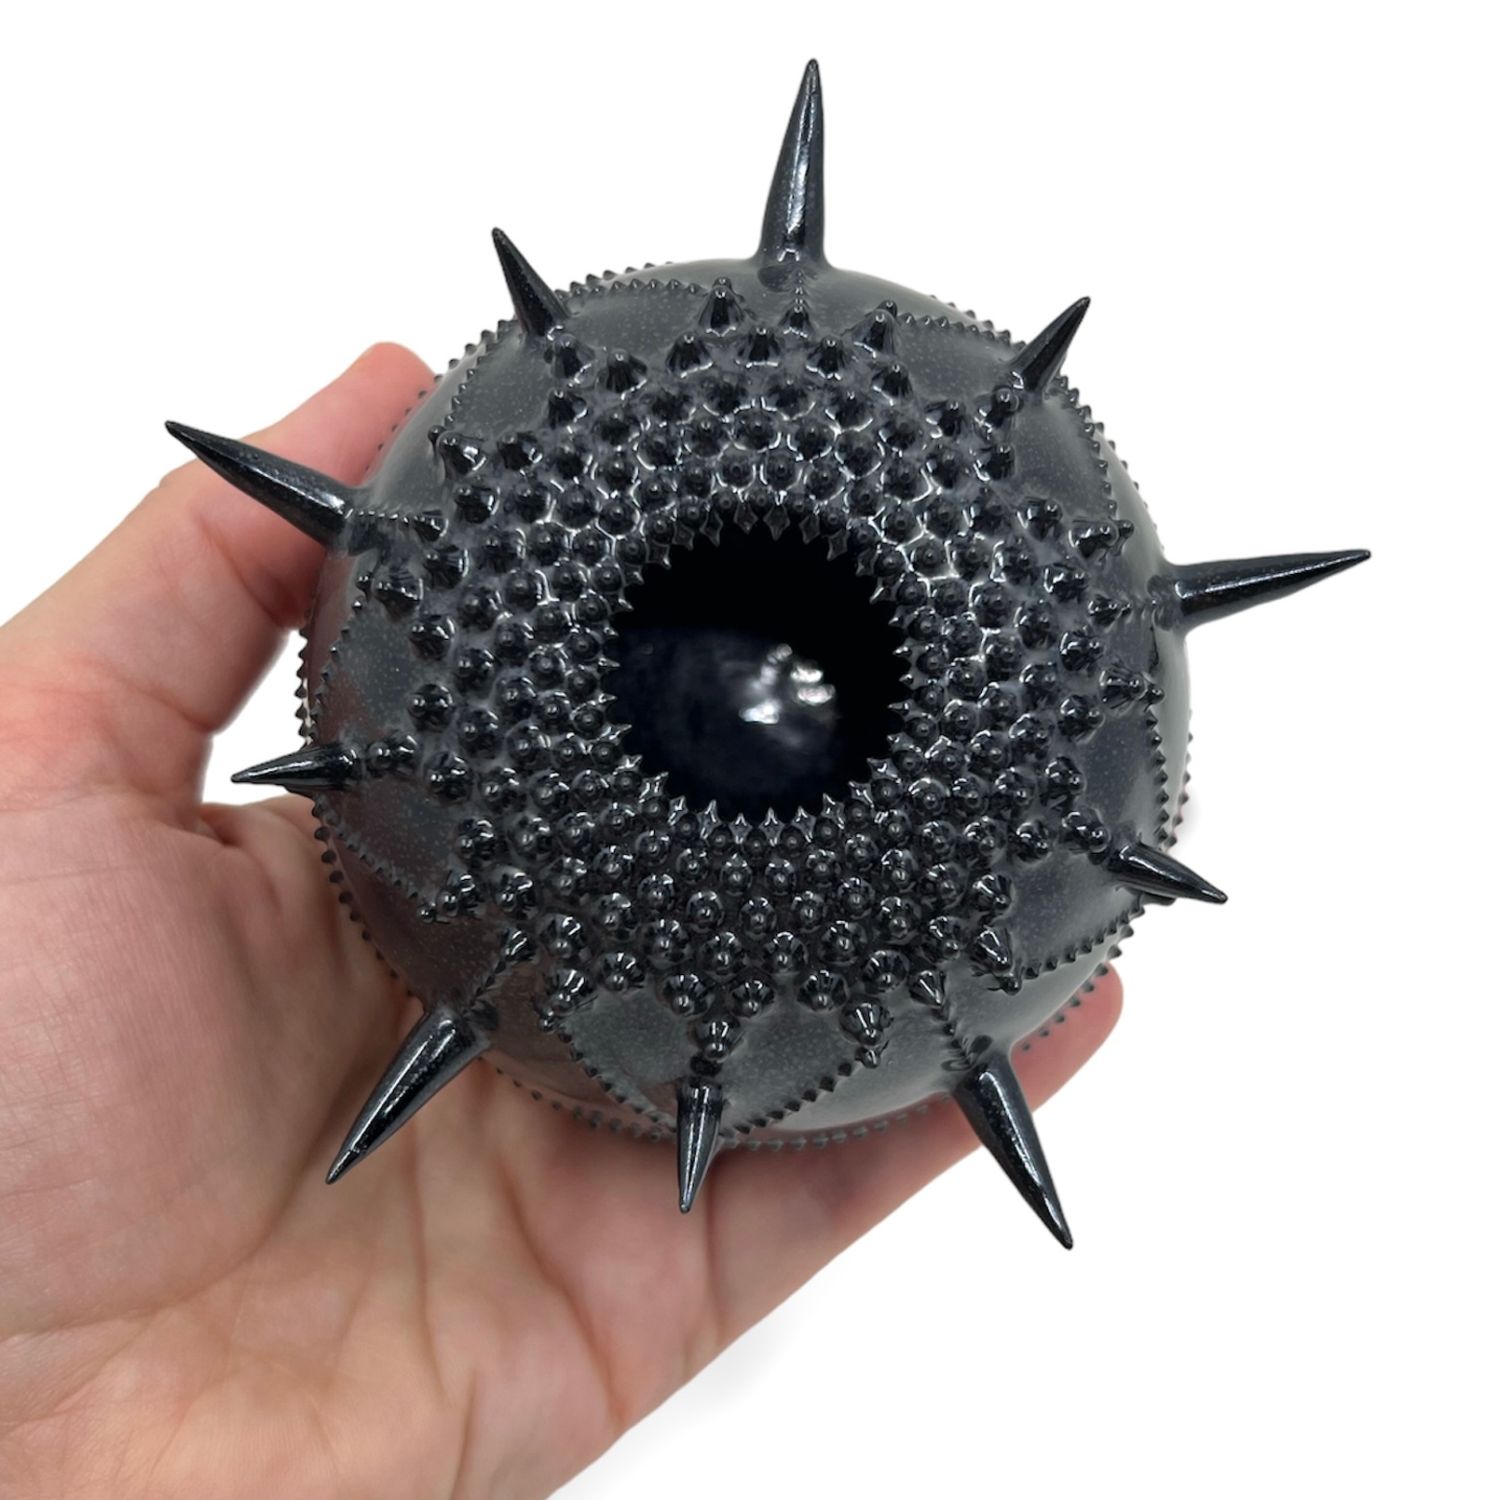 Zara Gardner: Black Urchin Sculpture with Spikes Product Image 2 of 4